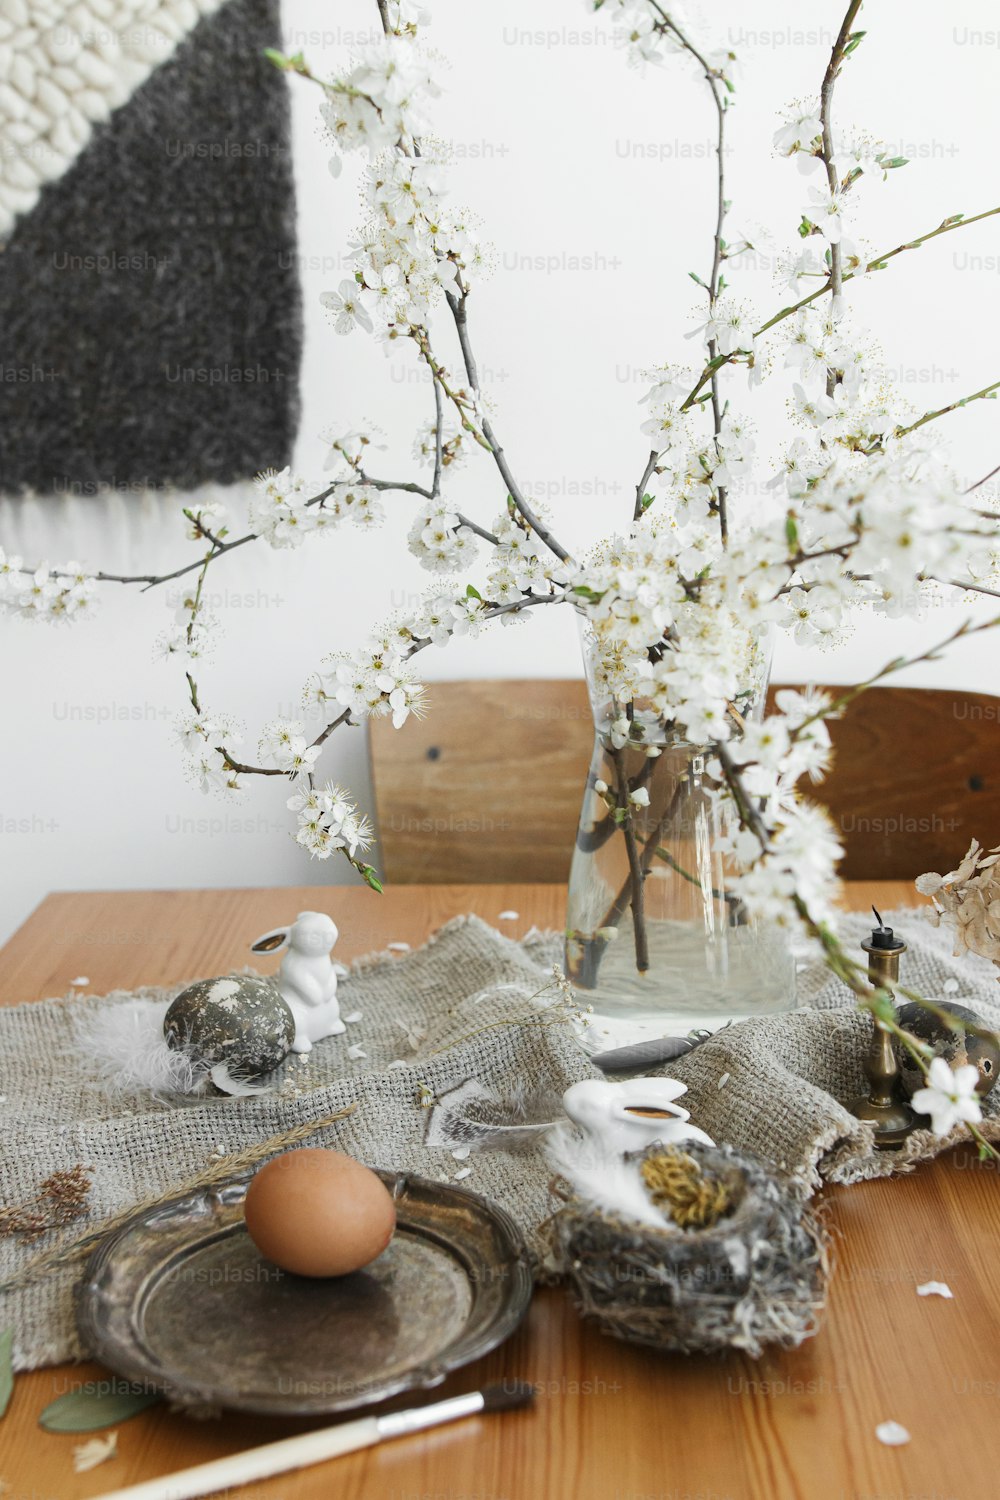 Happy Easter! Natural Easter eggs, white bunnies, feathers, nest and cherry blooming branch with petals on rustic linen napkin on table . Space for text. Eco friendly rural decor